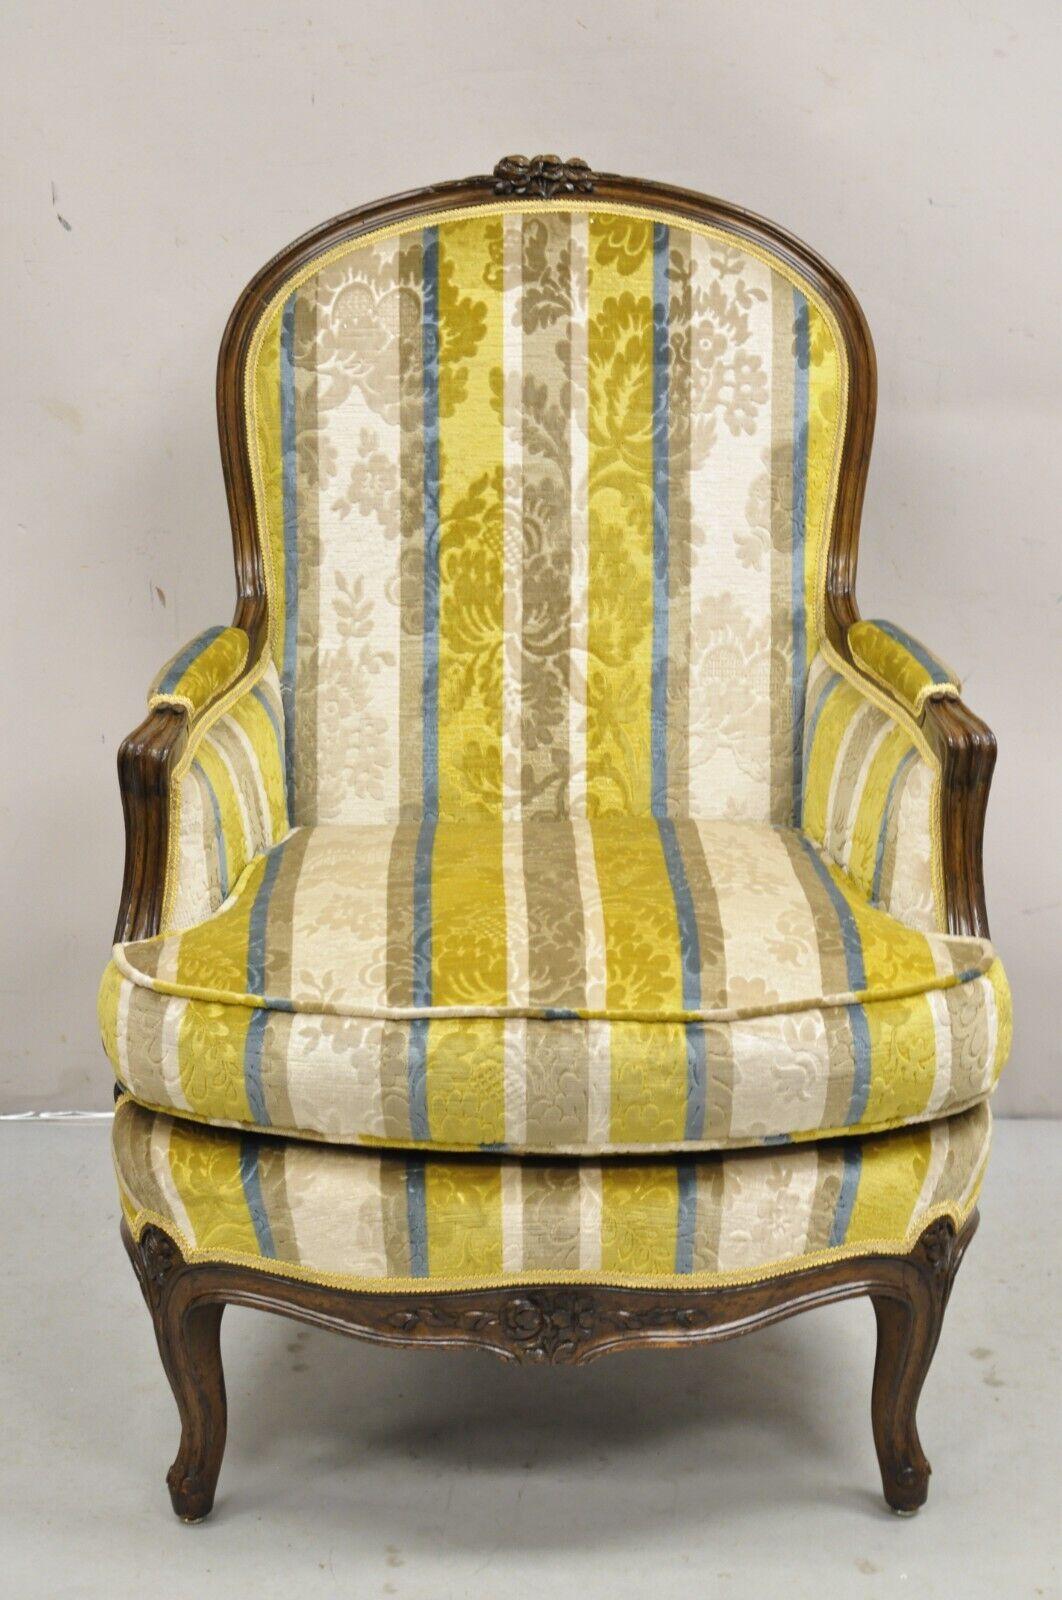 Vintage French Louis XV Style Carved Walnut Upholstered Bergere Lounge Arm Chair. Item features blue, yellow, and beige printed upholstery, finely carved and distressed frame, stretcher supported back, very nice vintage chair. Circa Mid 20th